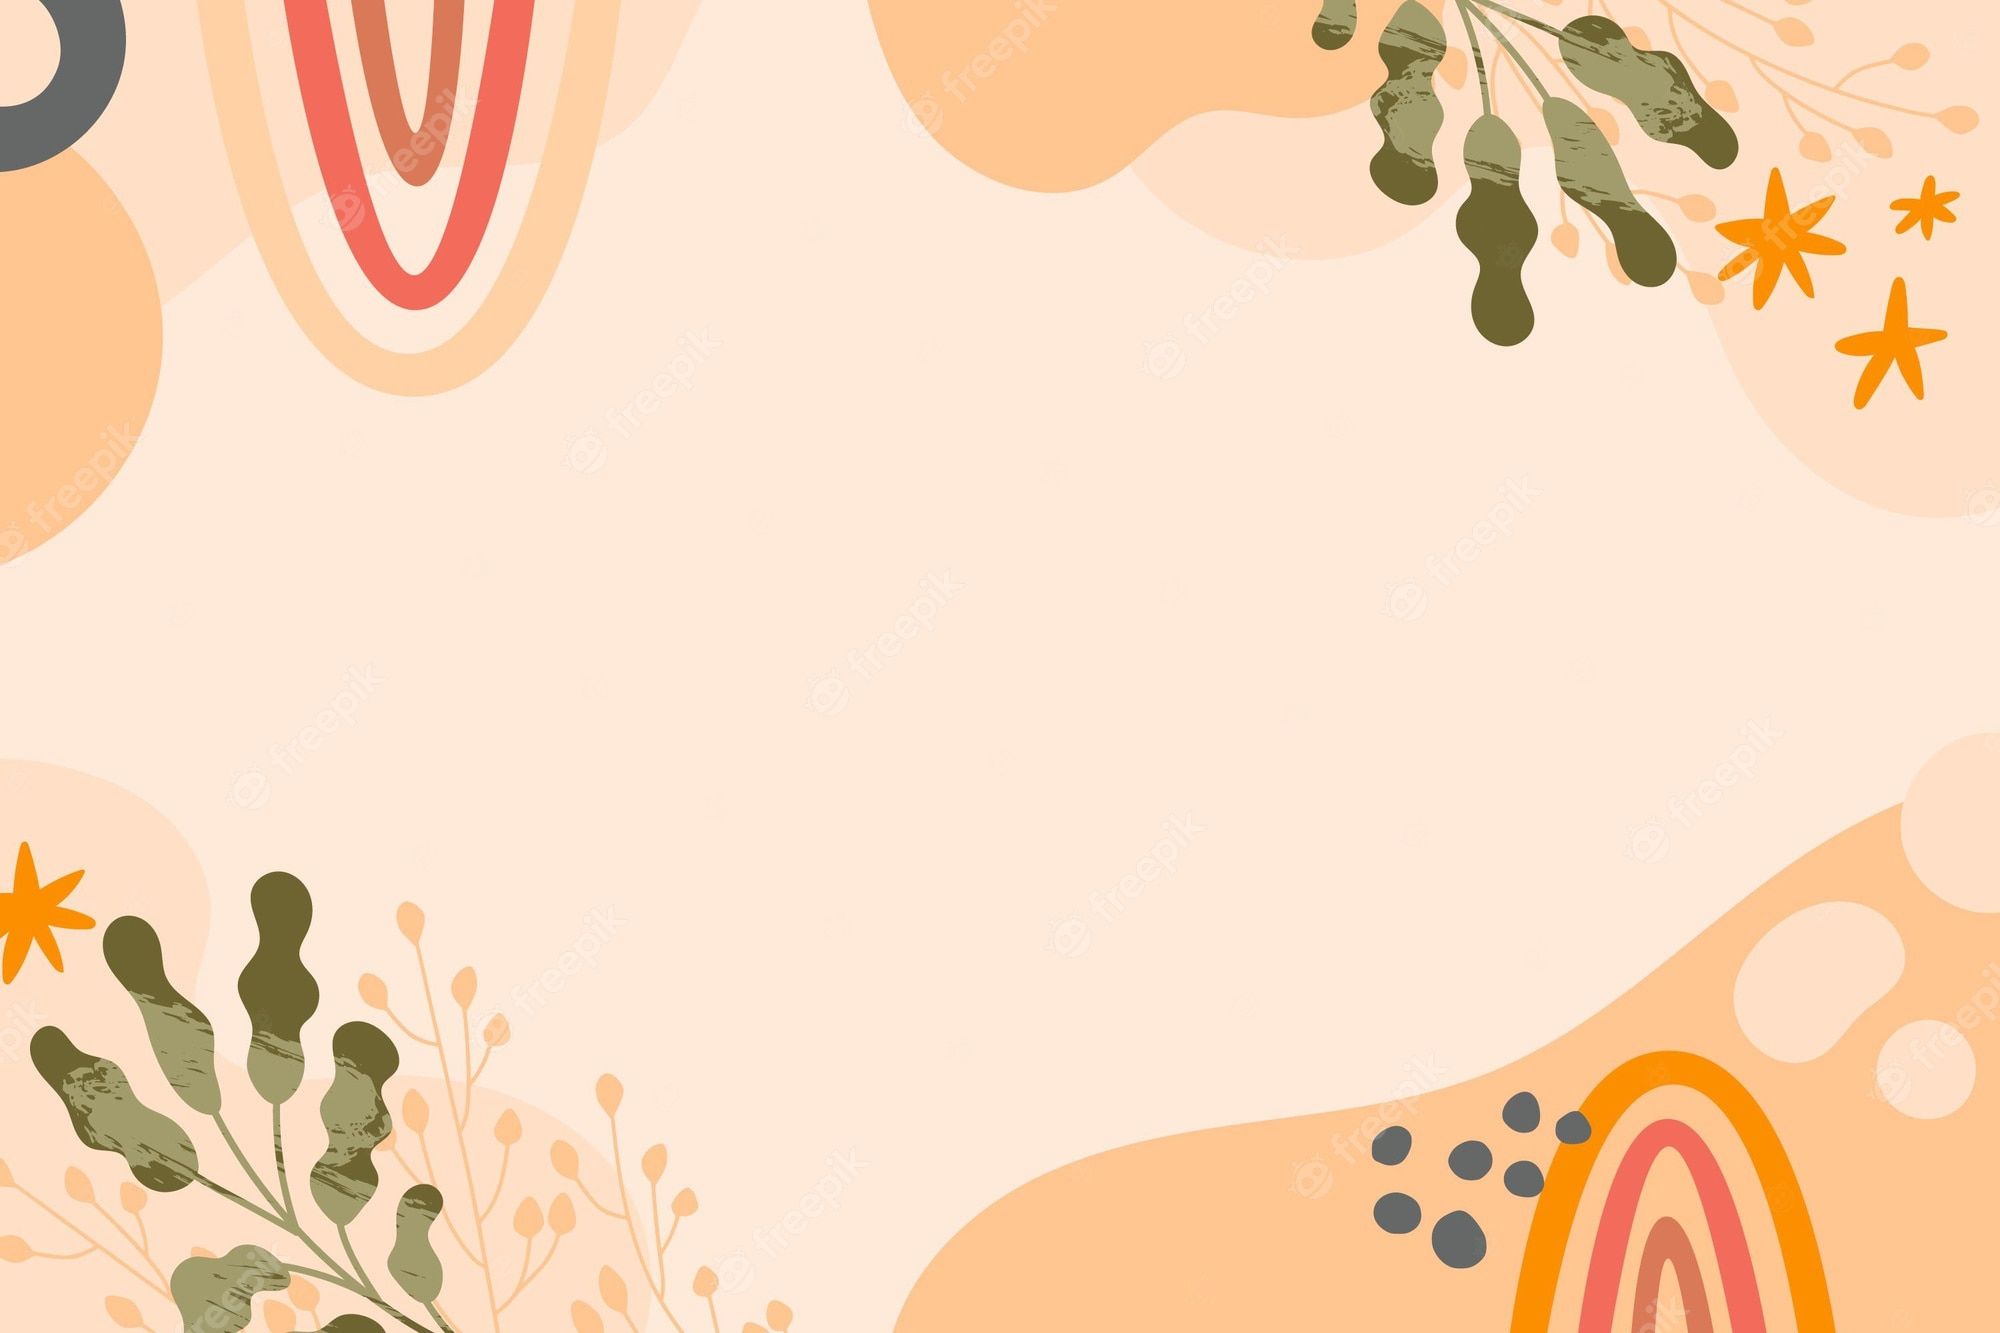 A pastel colored abstract design with plants - Boho